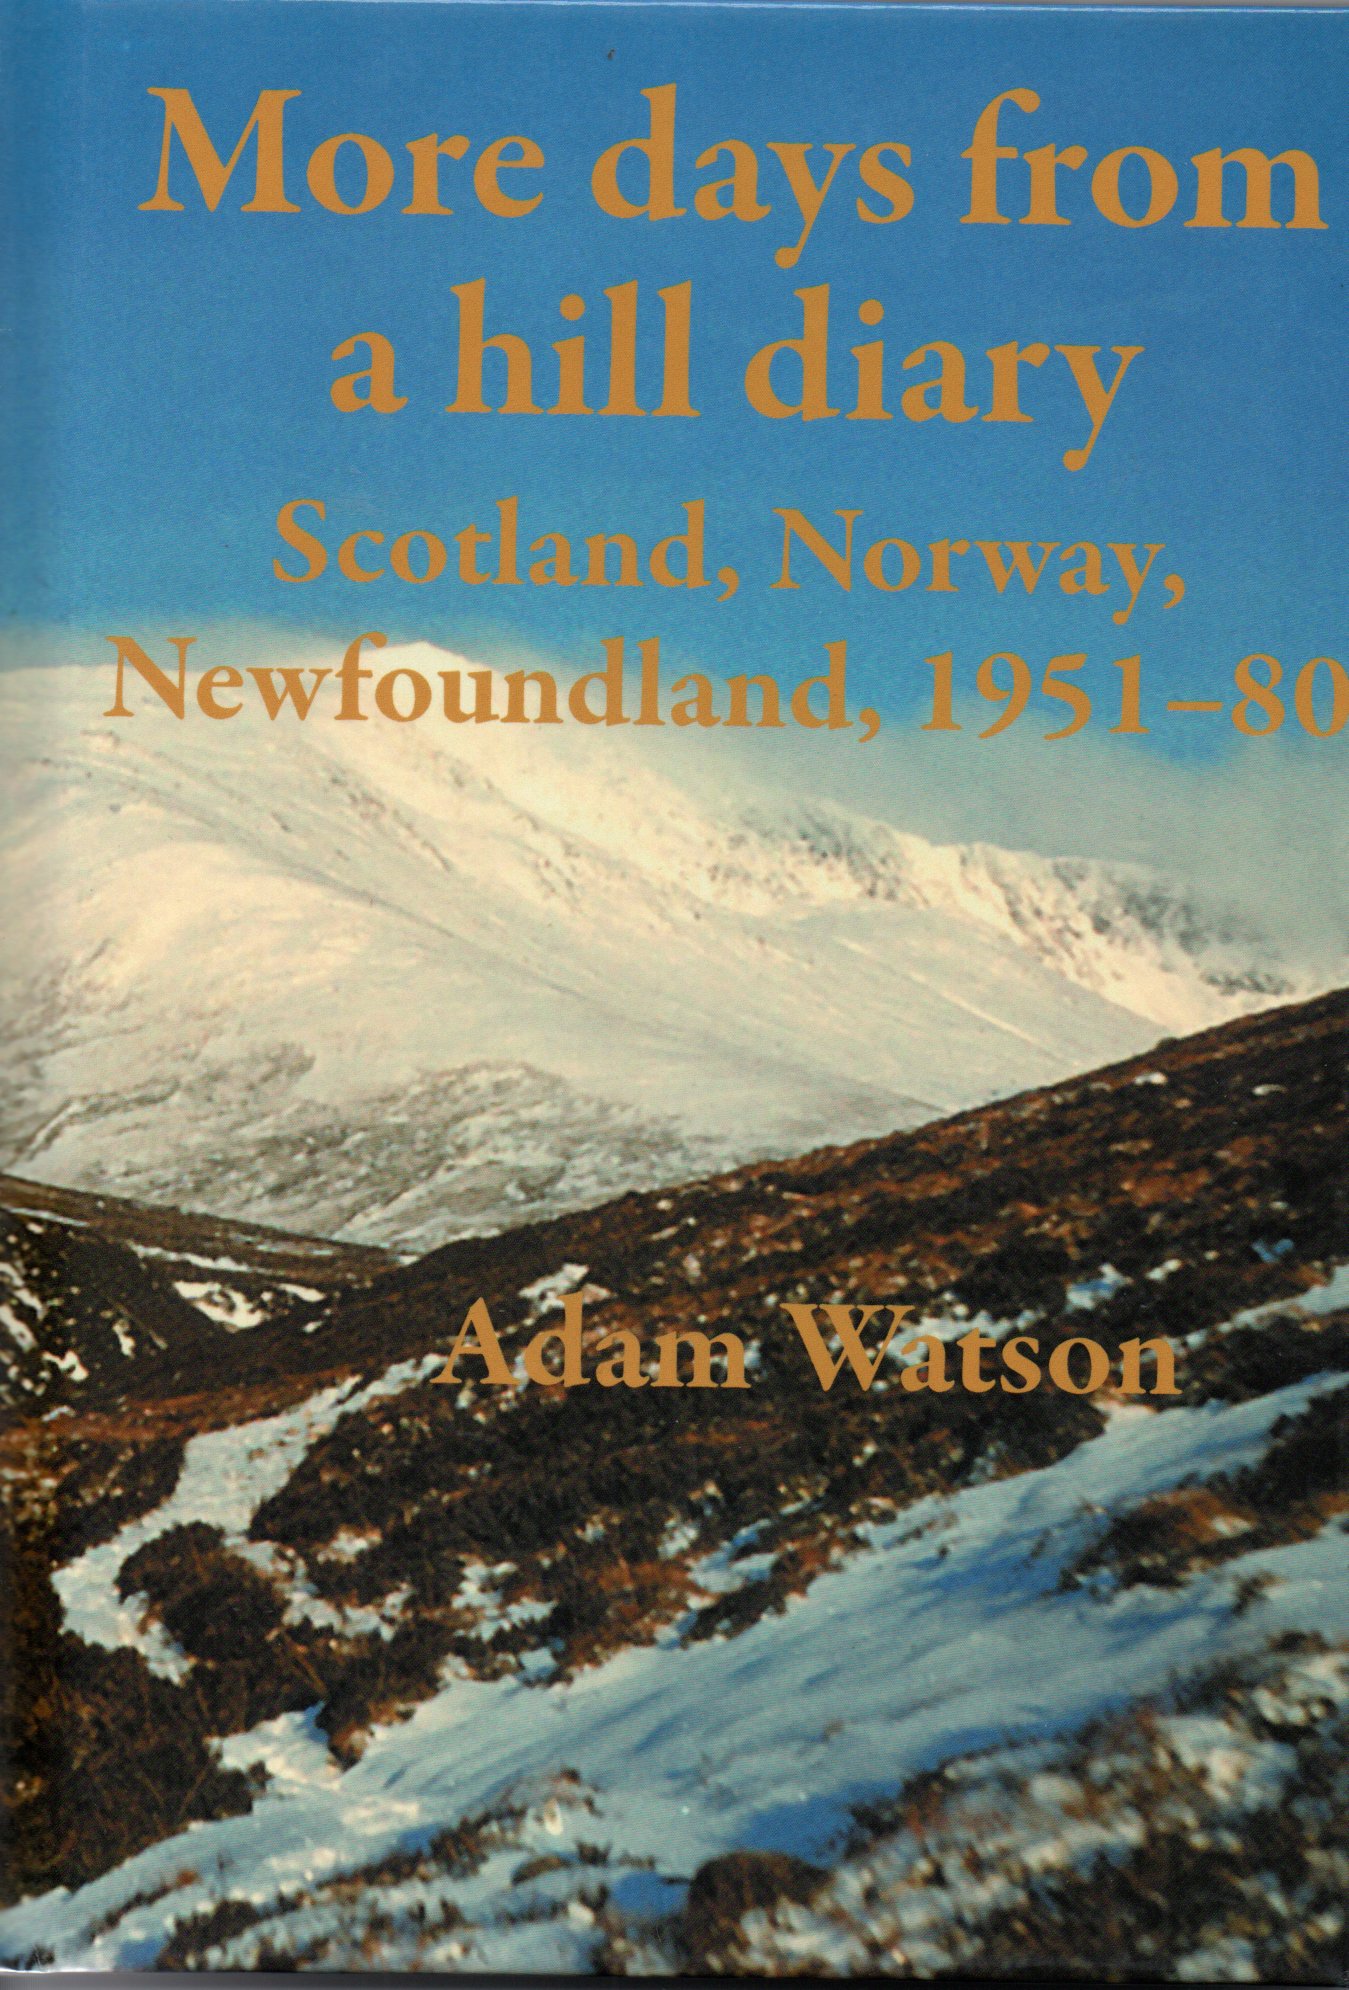 Image for More days from a hill diary: Scotland, Norway, Newfoundland, 1951-80